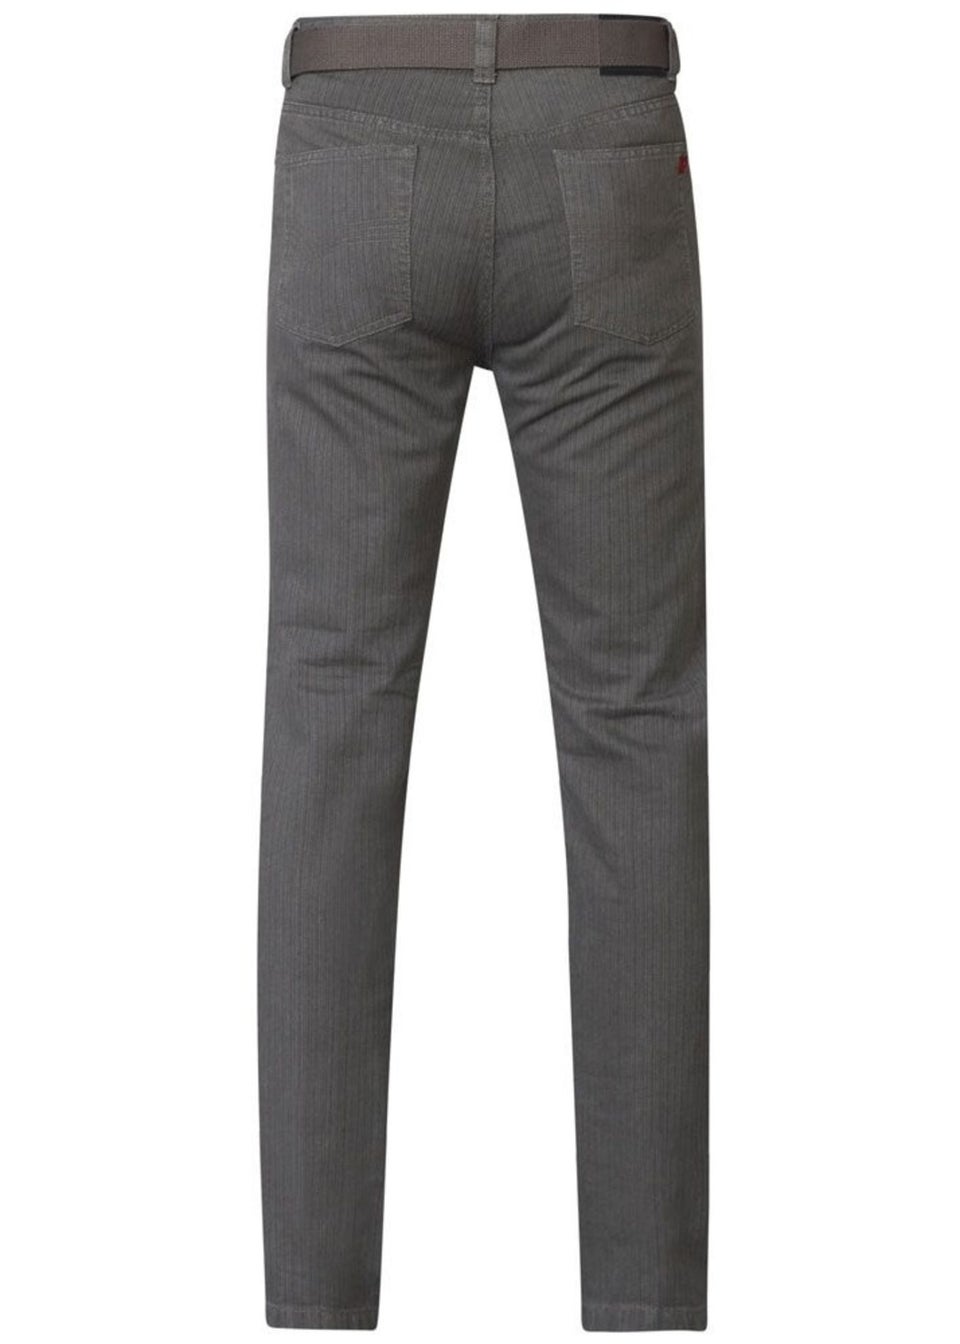 Duke Brown London Brian Bedford Cord Trousers With Belt